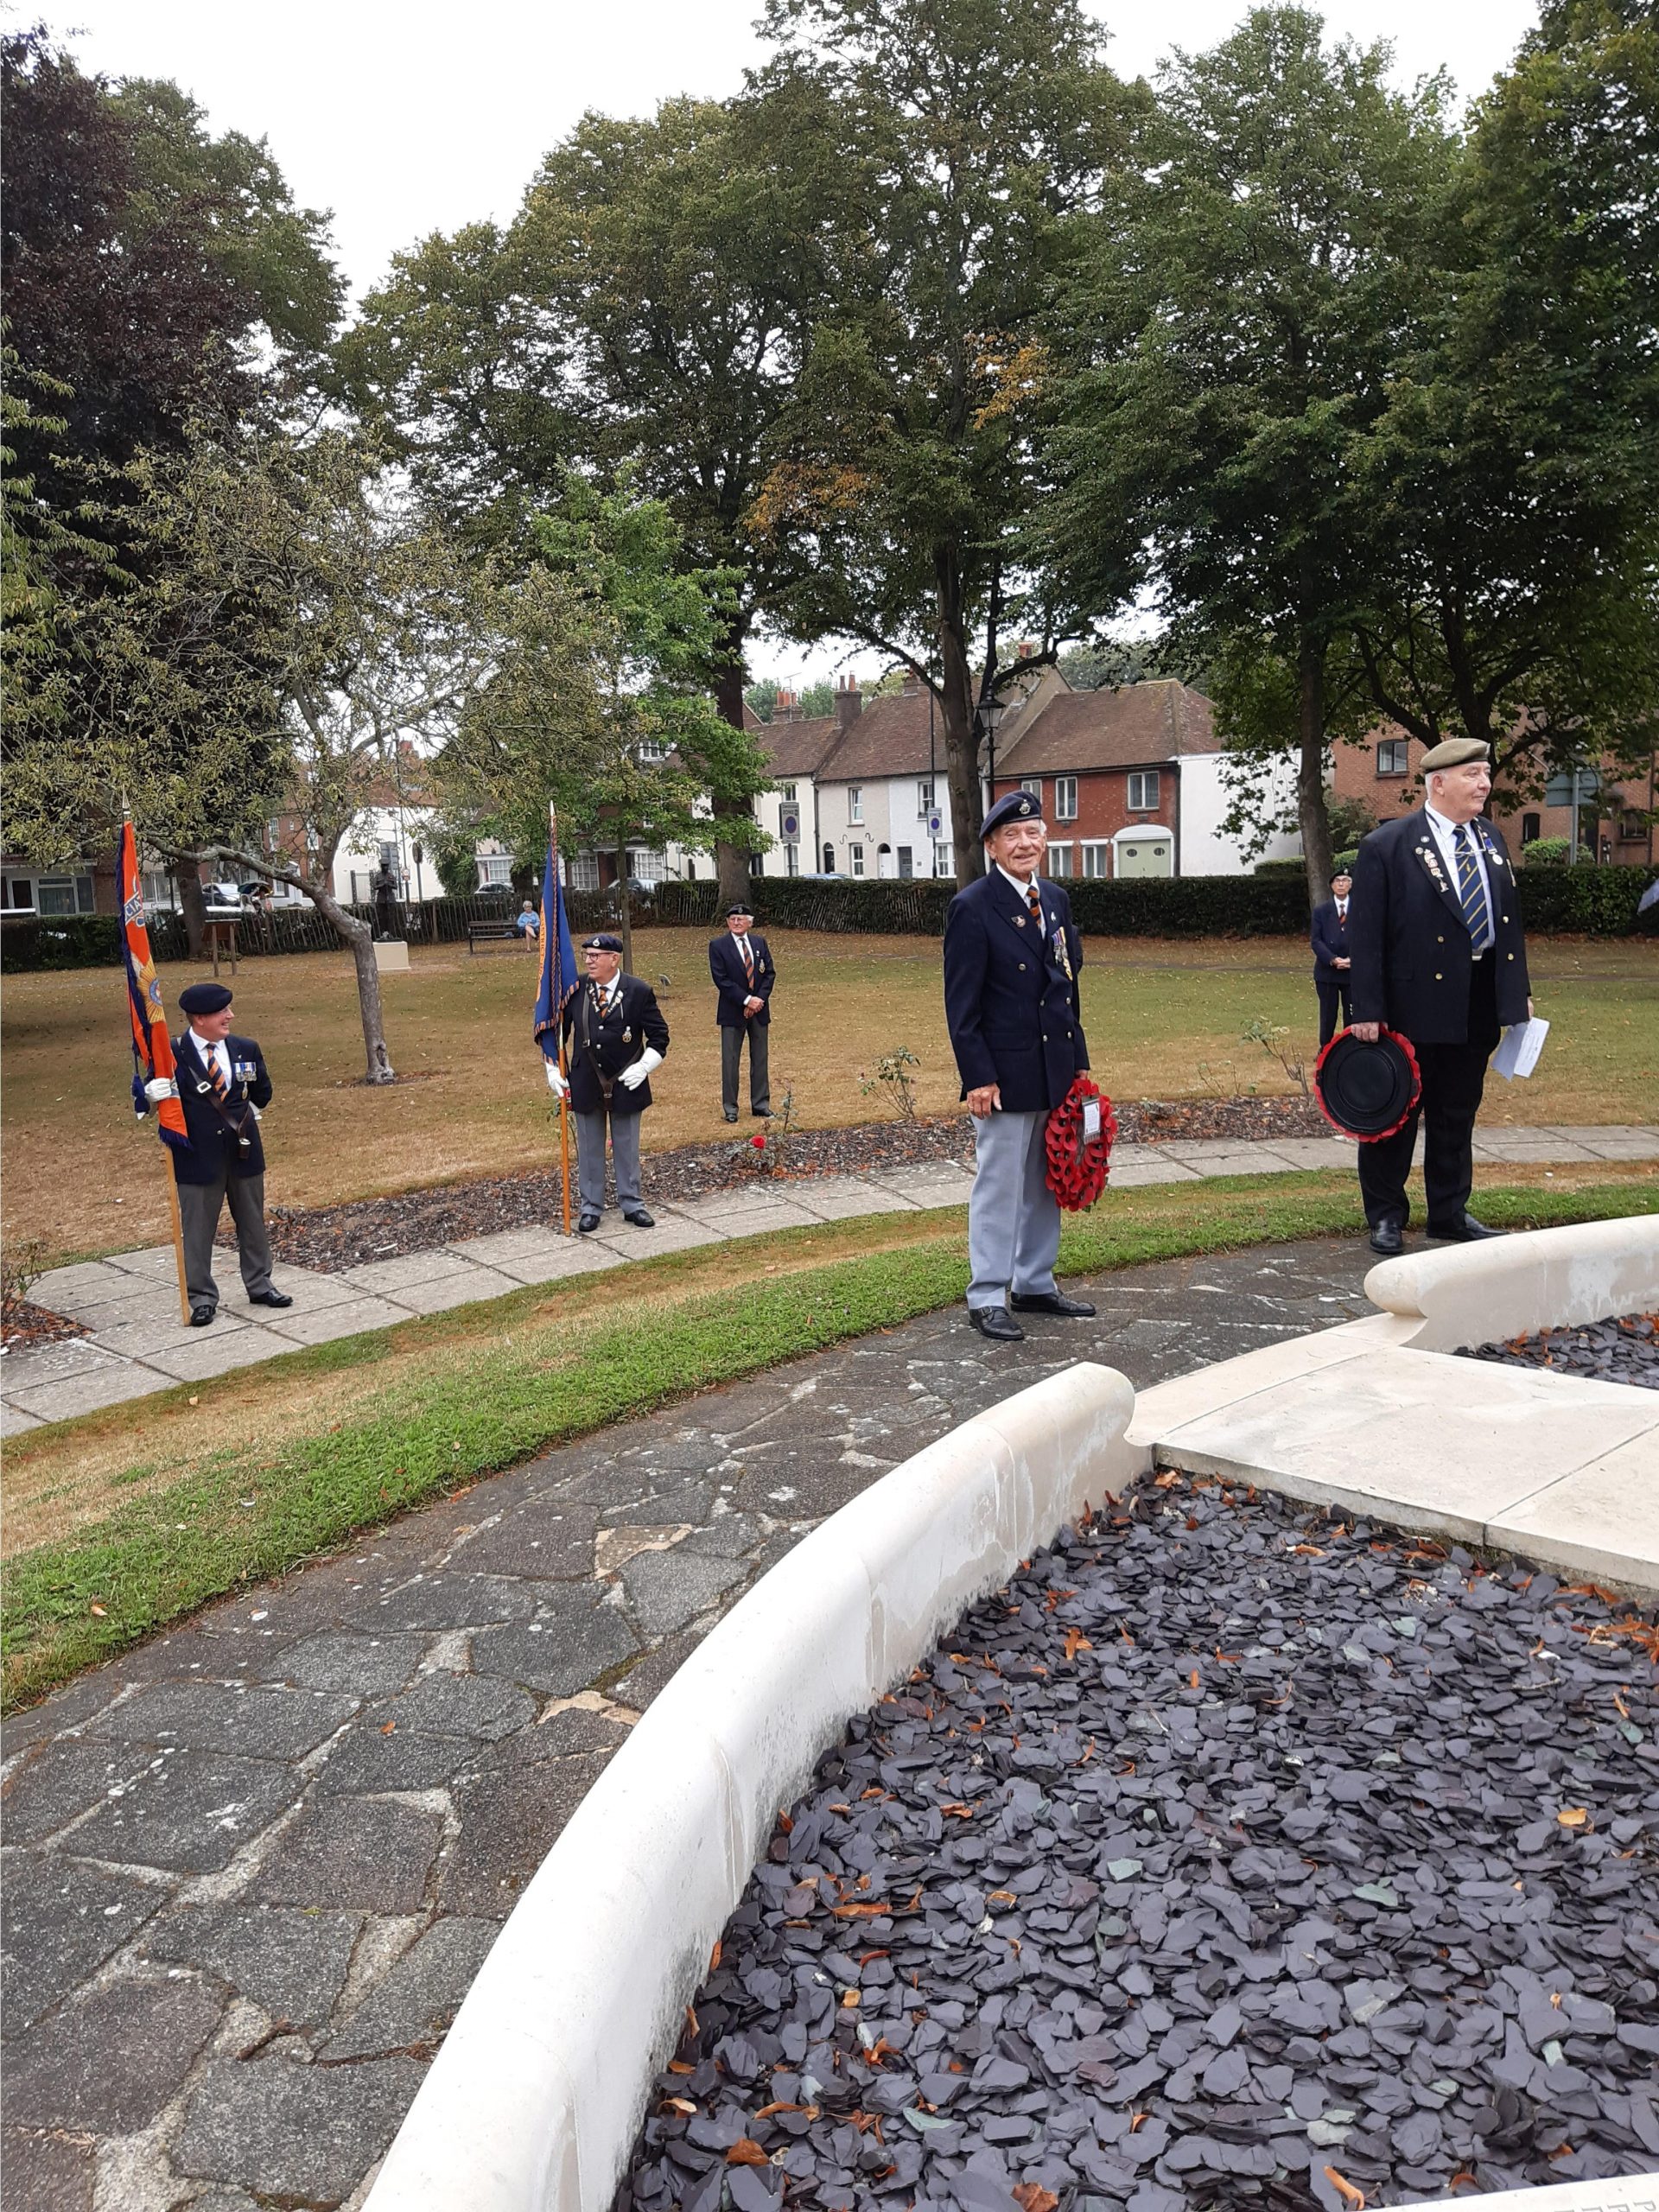 Image showing standard bearers at the War Memorial, Litten Gardens, Chichester, on the occasion of the 75th anniversary of VJ Day, August 2020